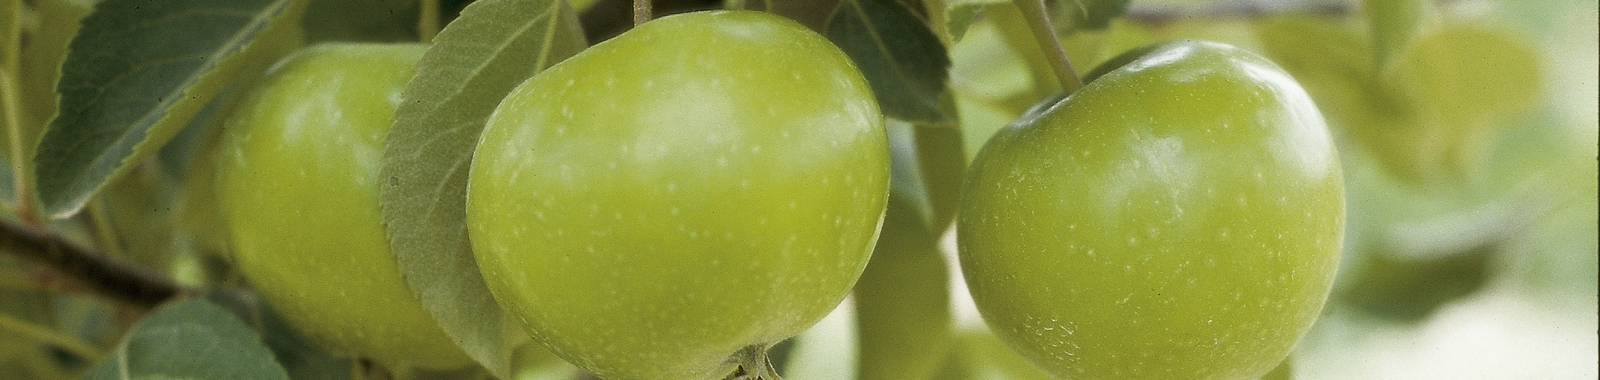 How crop nutrition affects apples